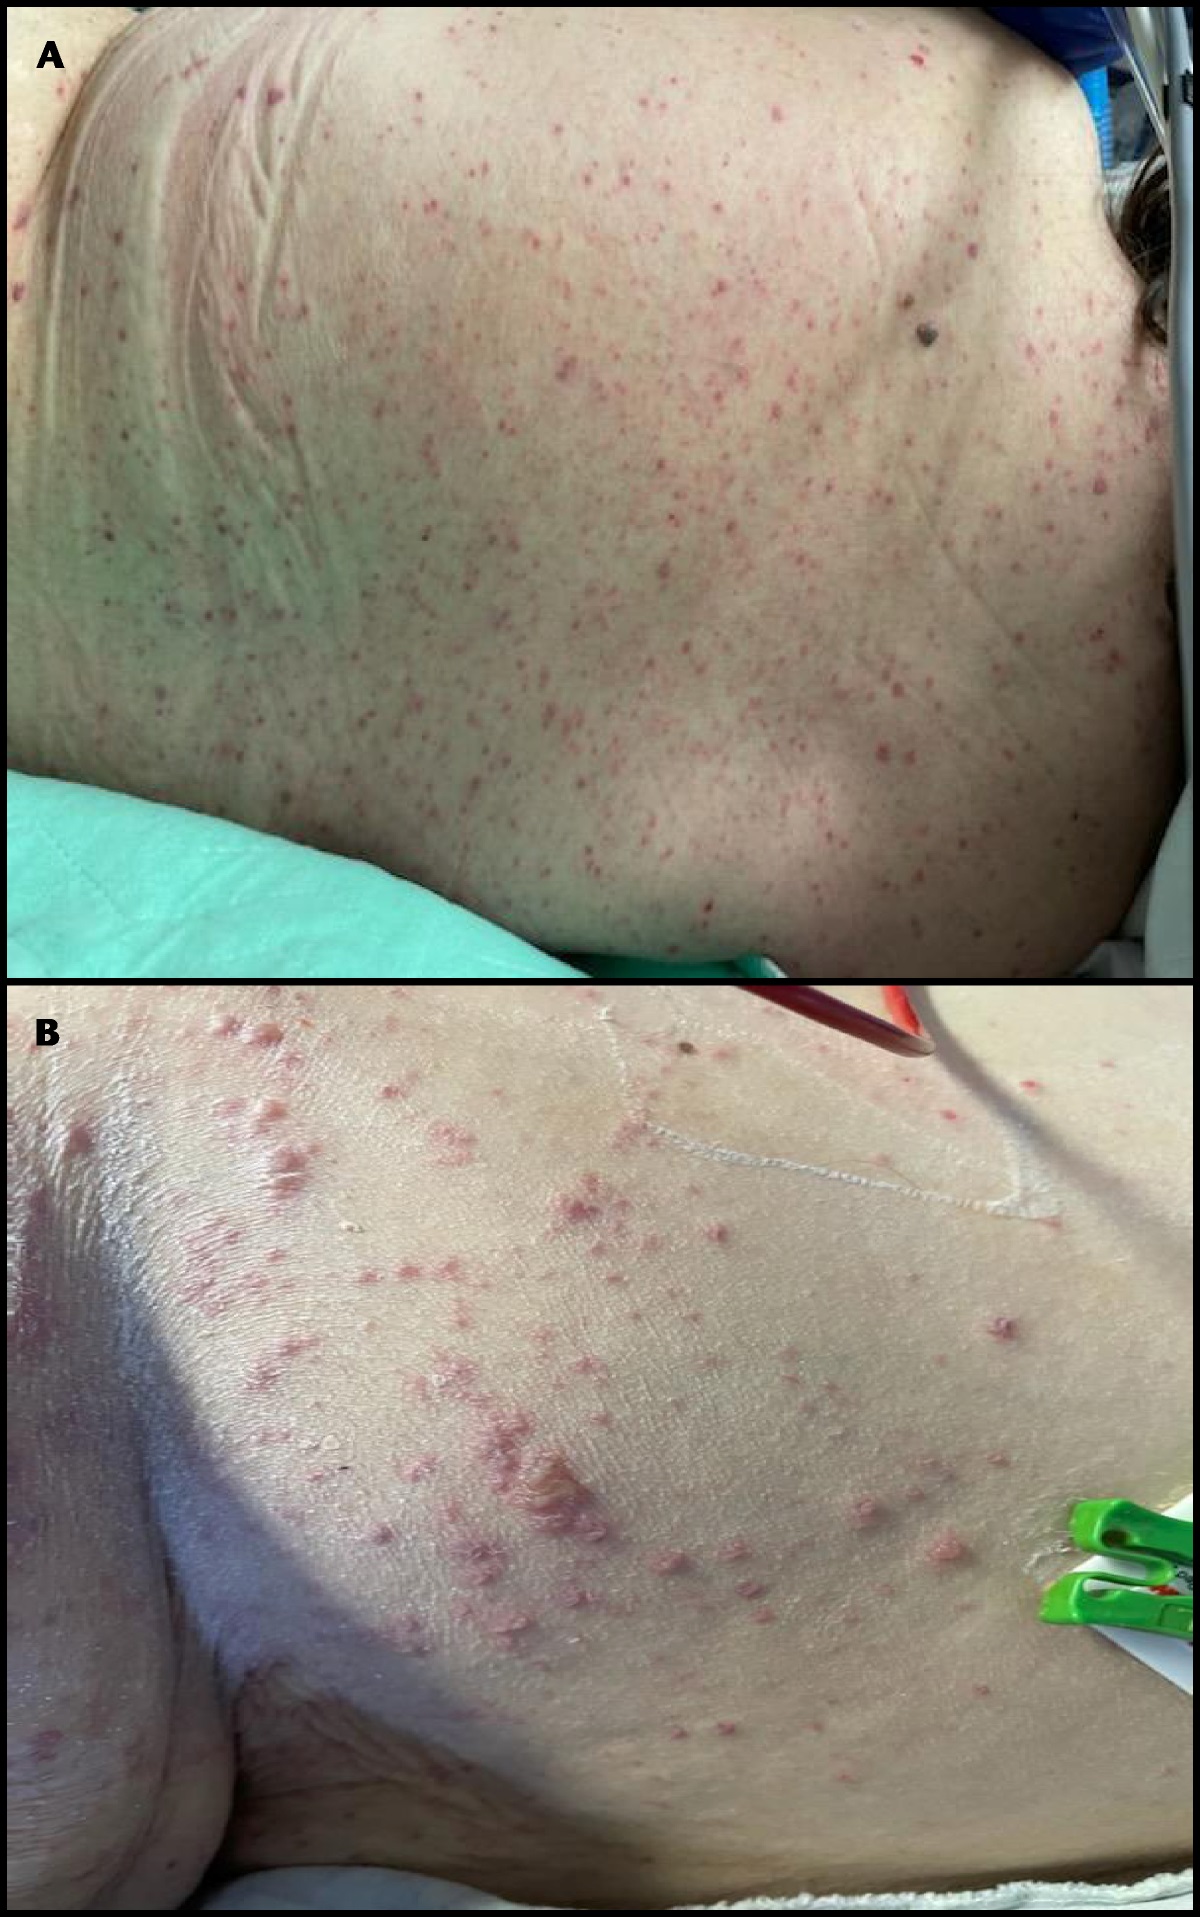 An Atypical Presentation of Disseminated Varicella Infection